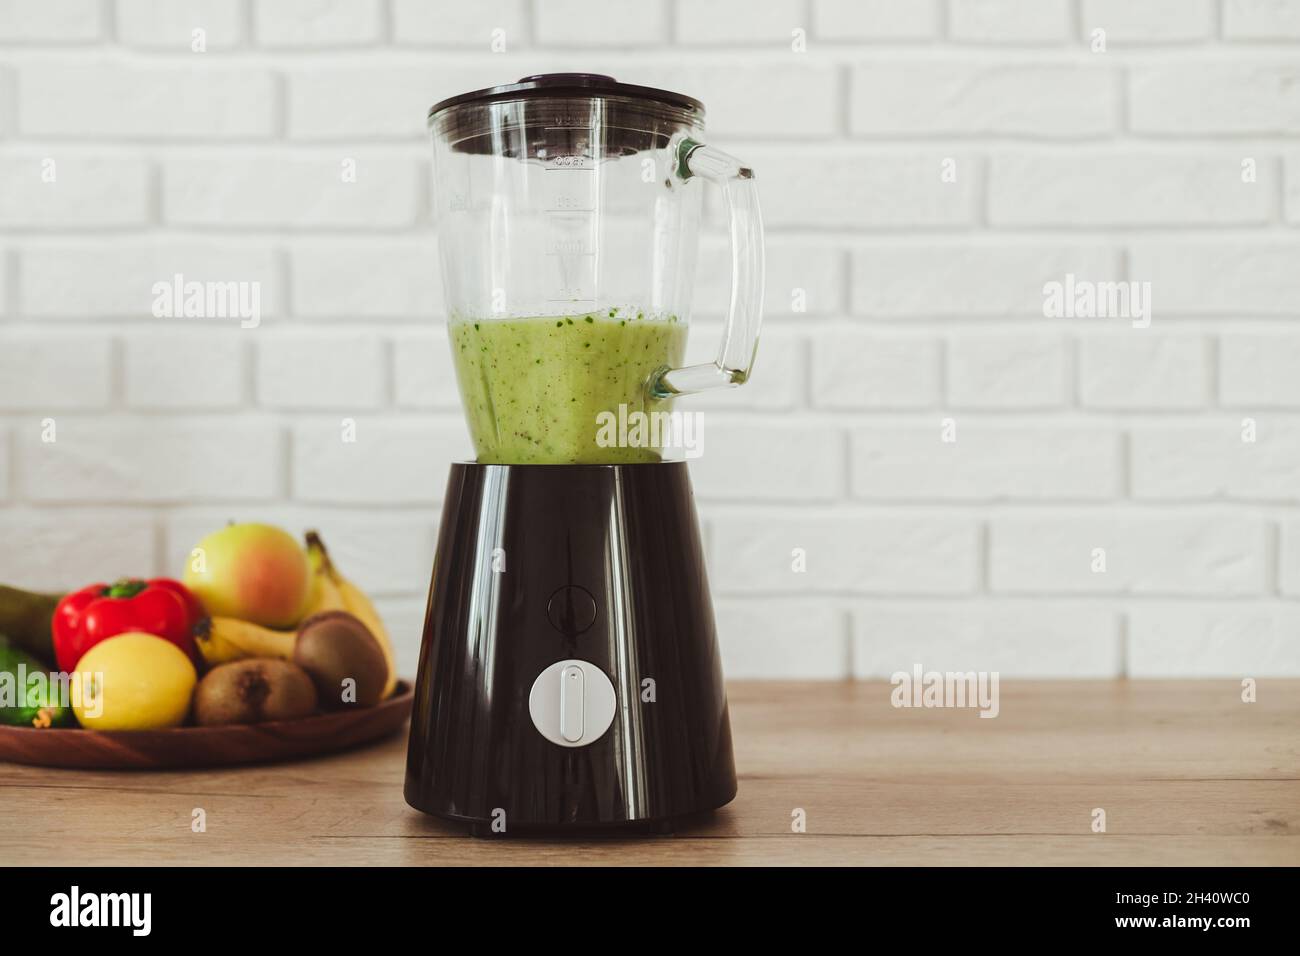 Stationary blender with healthy green smoothie and ingredients on table in kitchen Stock Photo